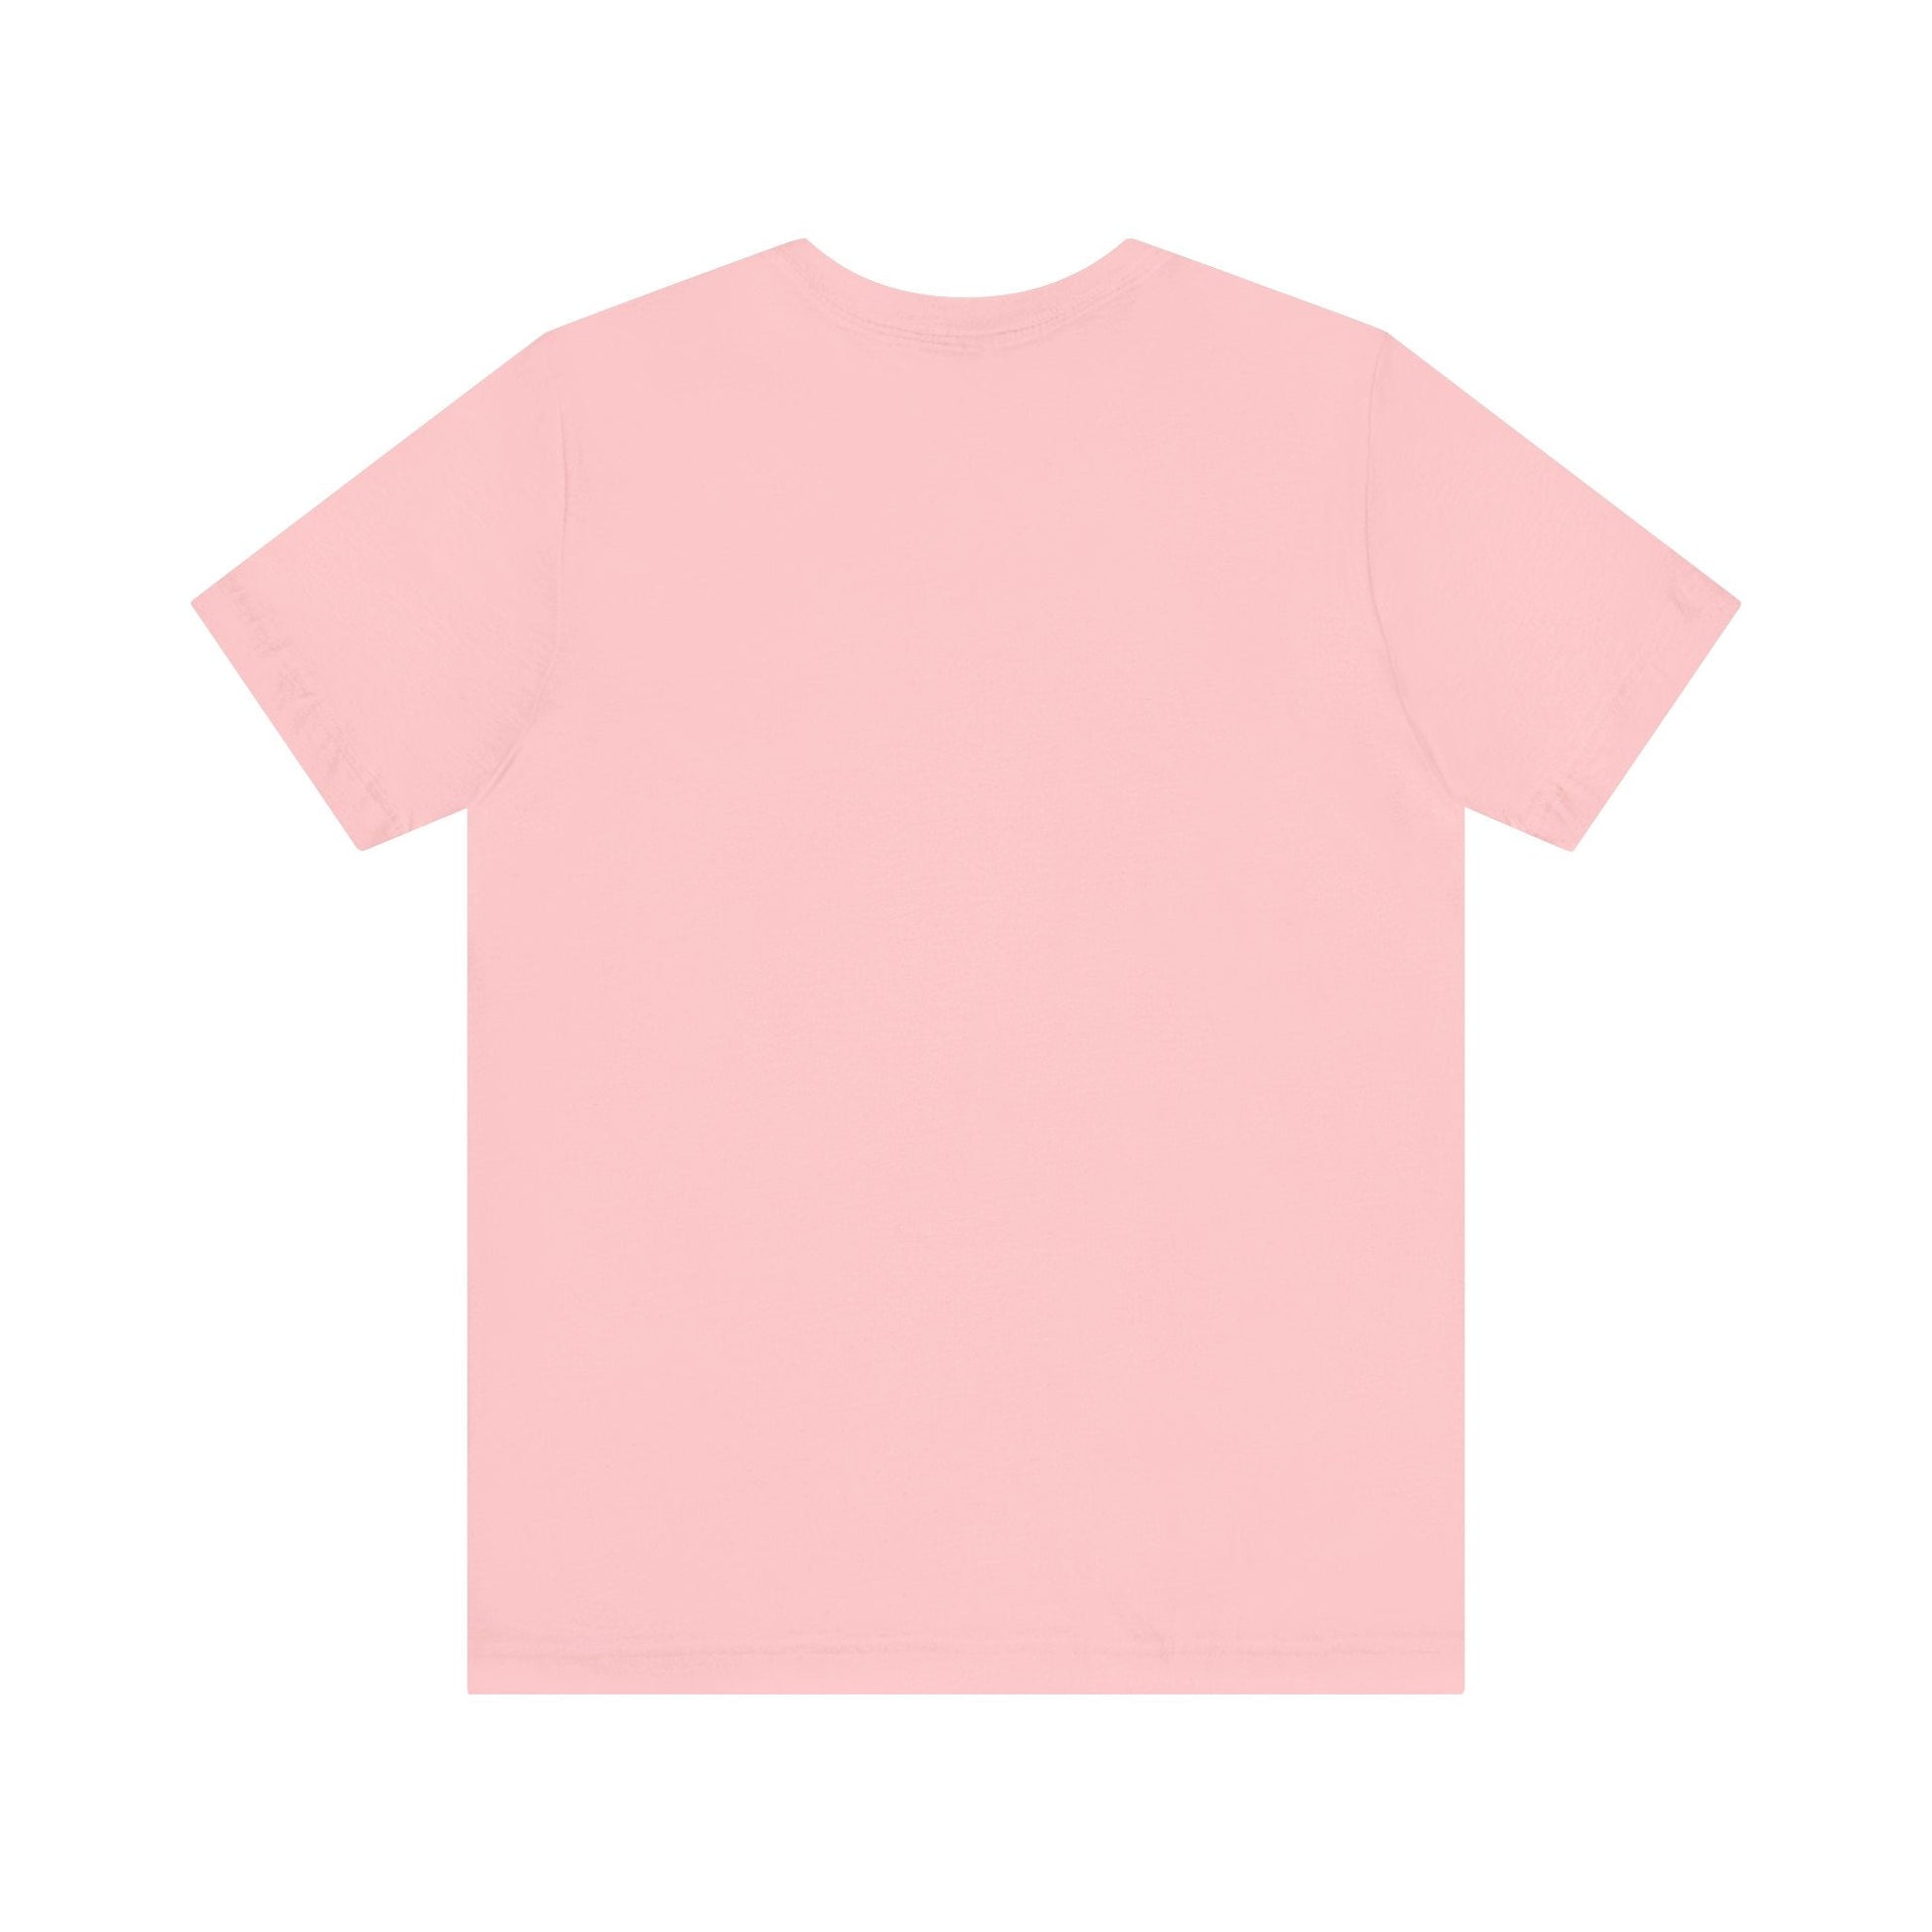 Bark For Bobby Unisex Tee Pink - TEAM KENNEDY. All rights reserved